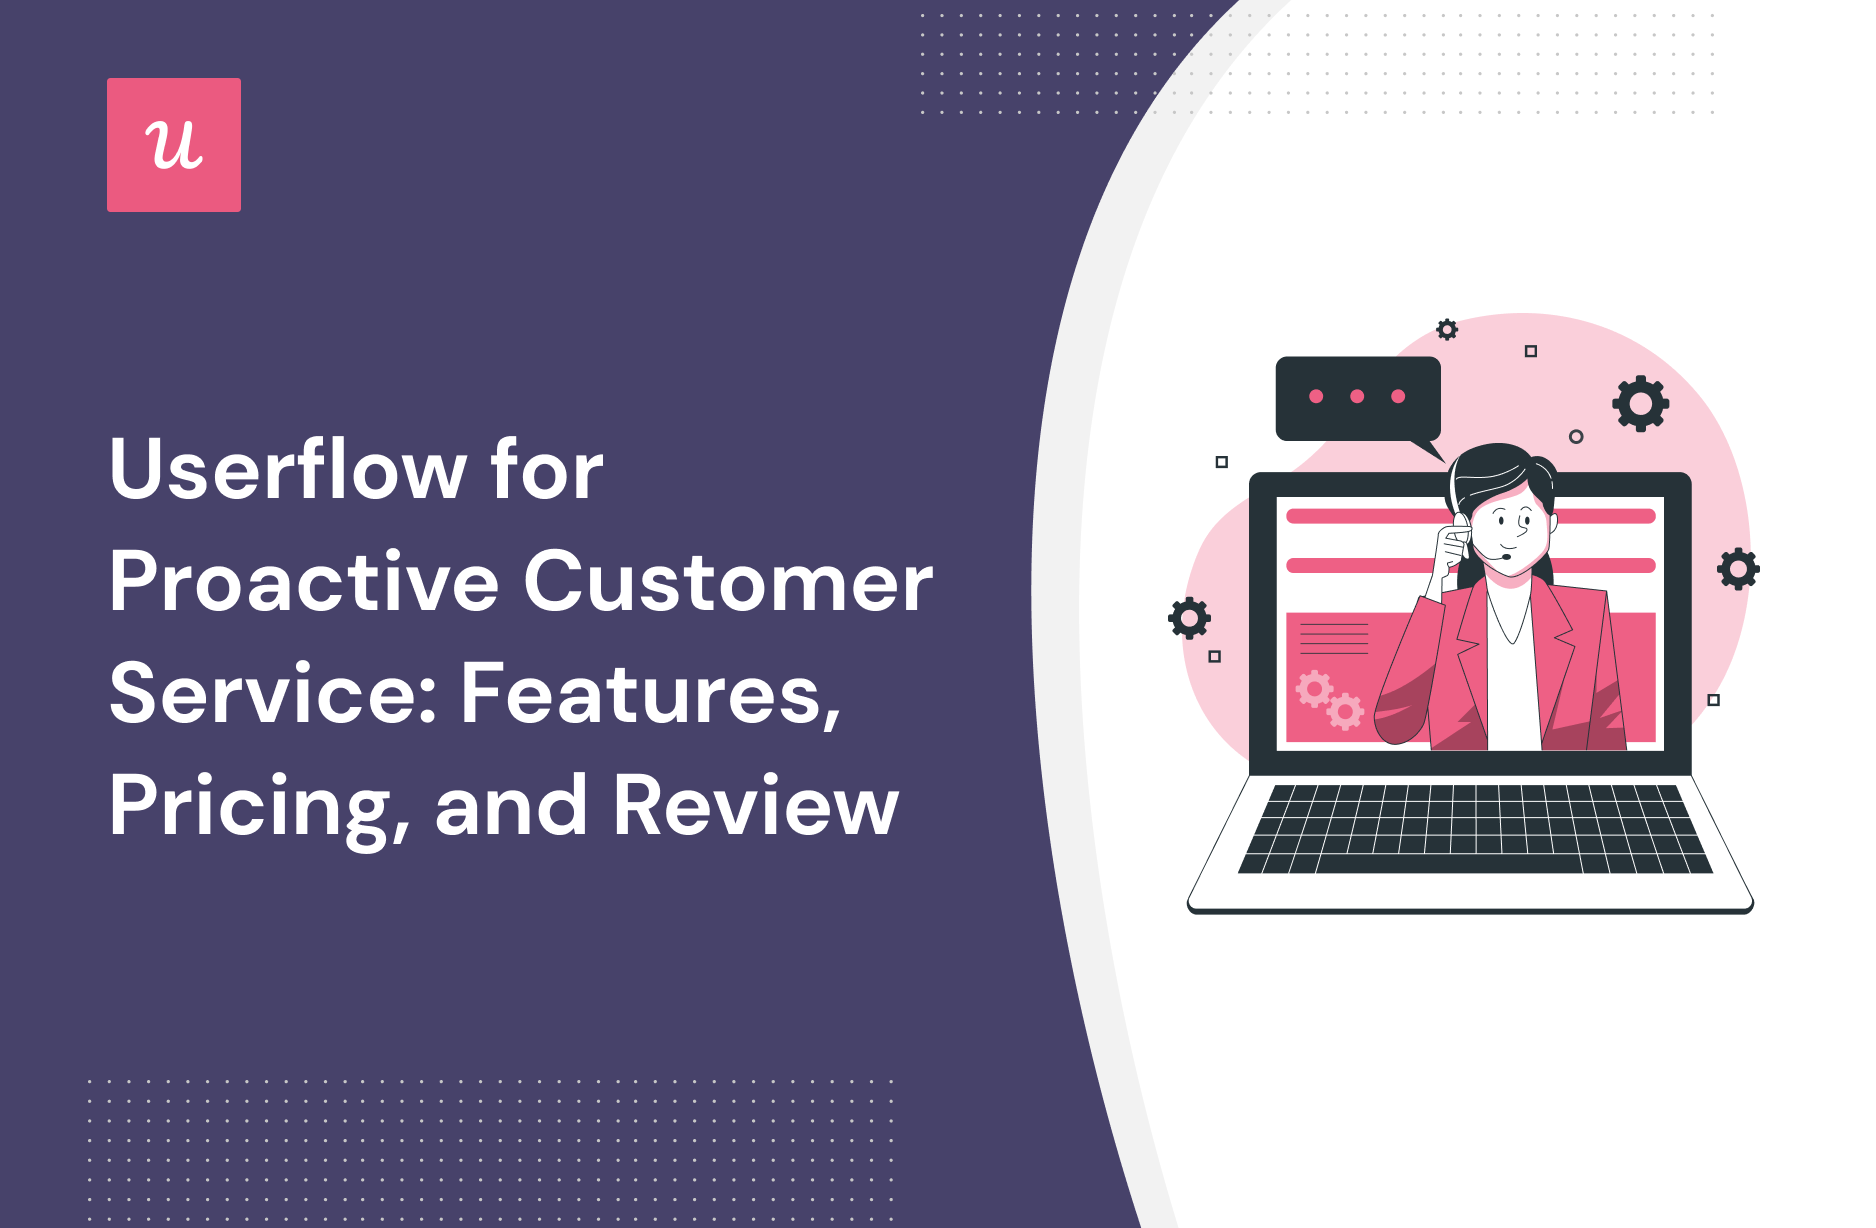 Userflow for Proactive Customer Service: Features, Pricing, and Review